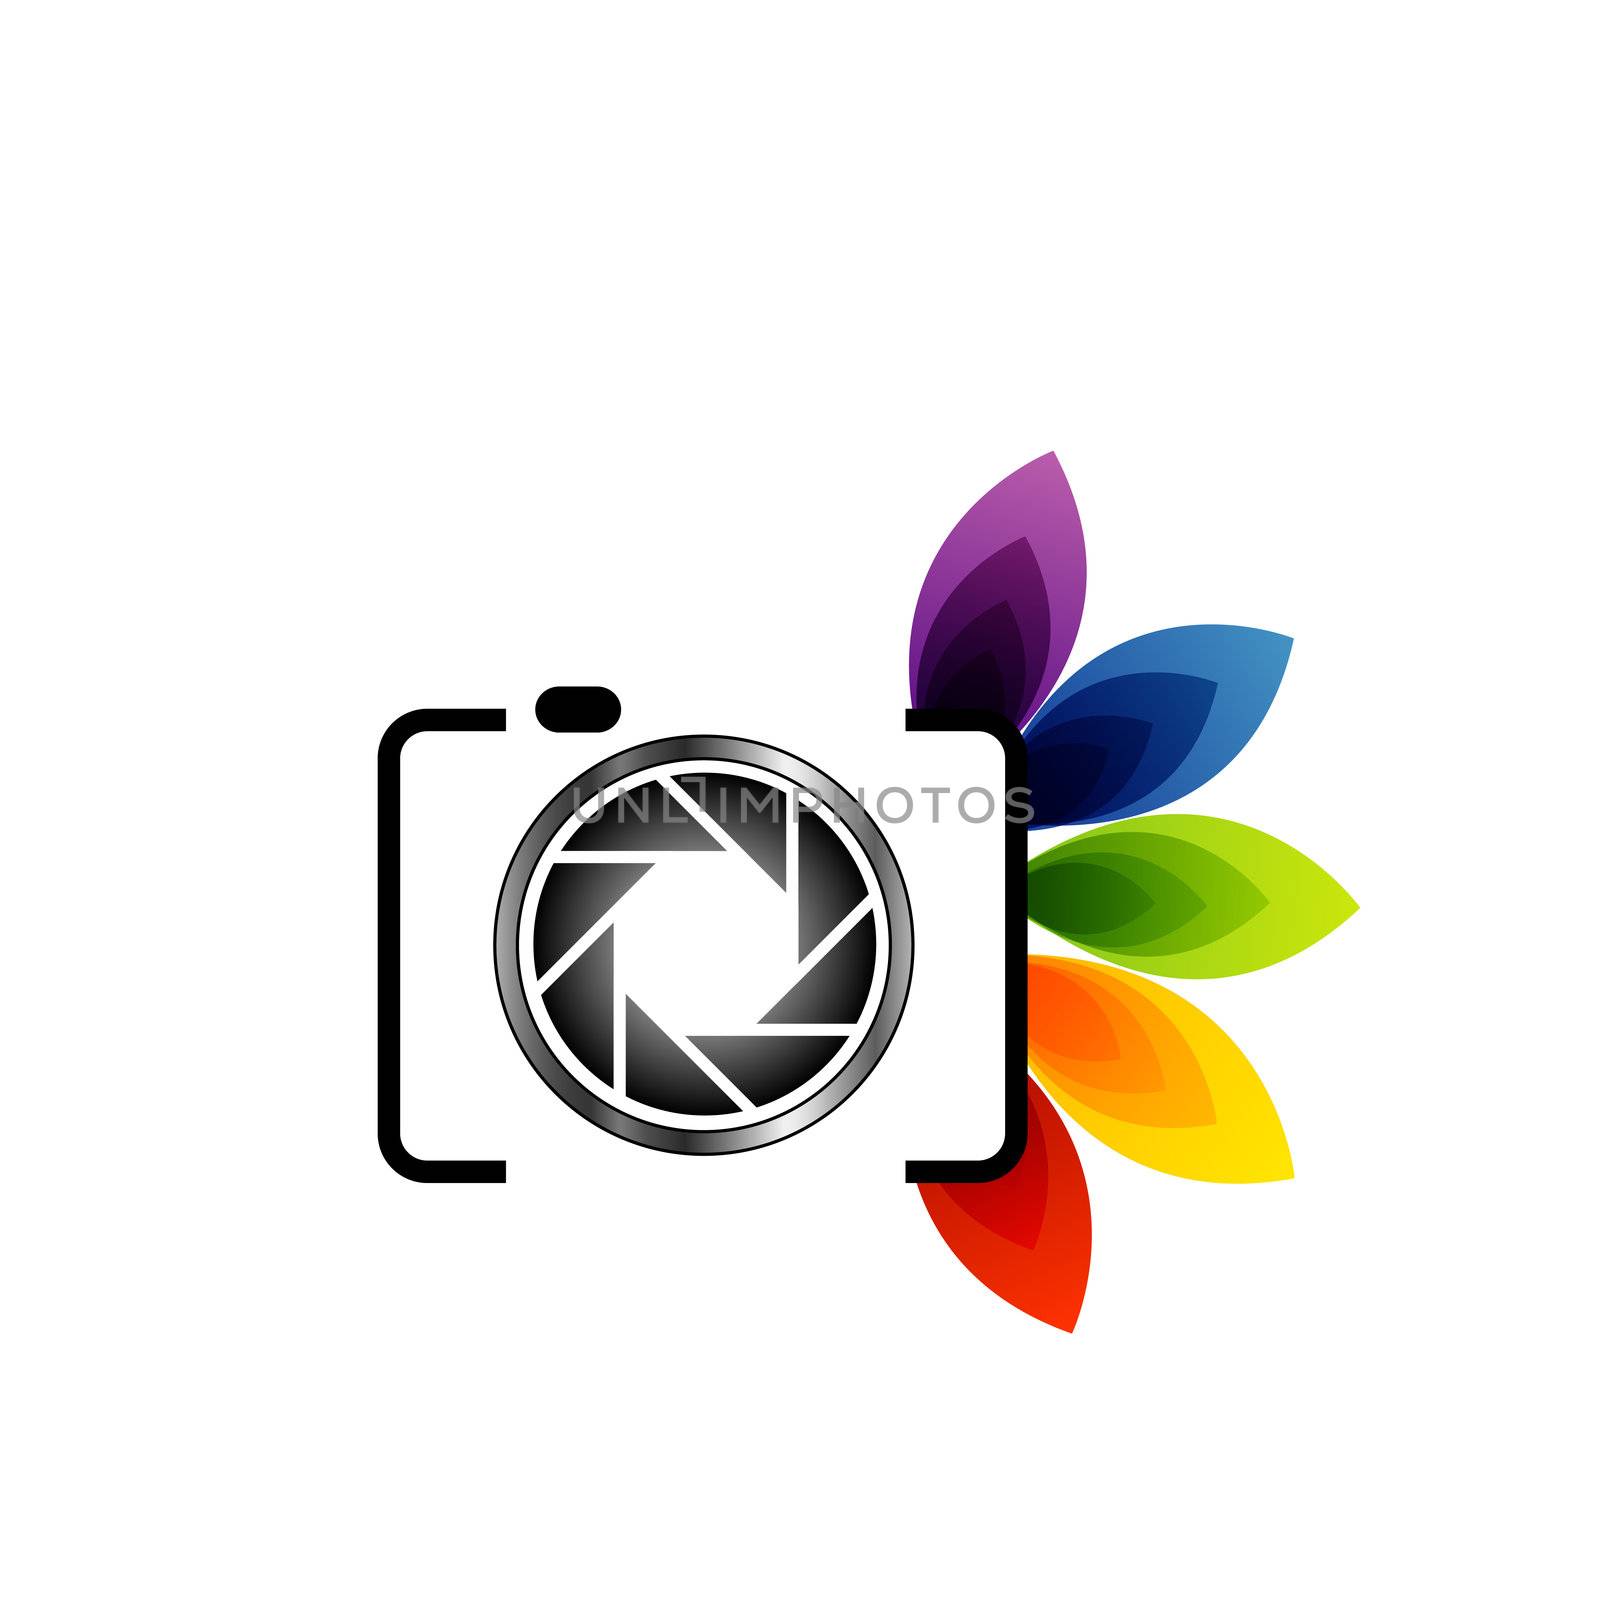 Photography logo with colorful leaves by shawlinmohd